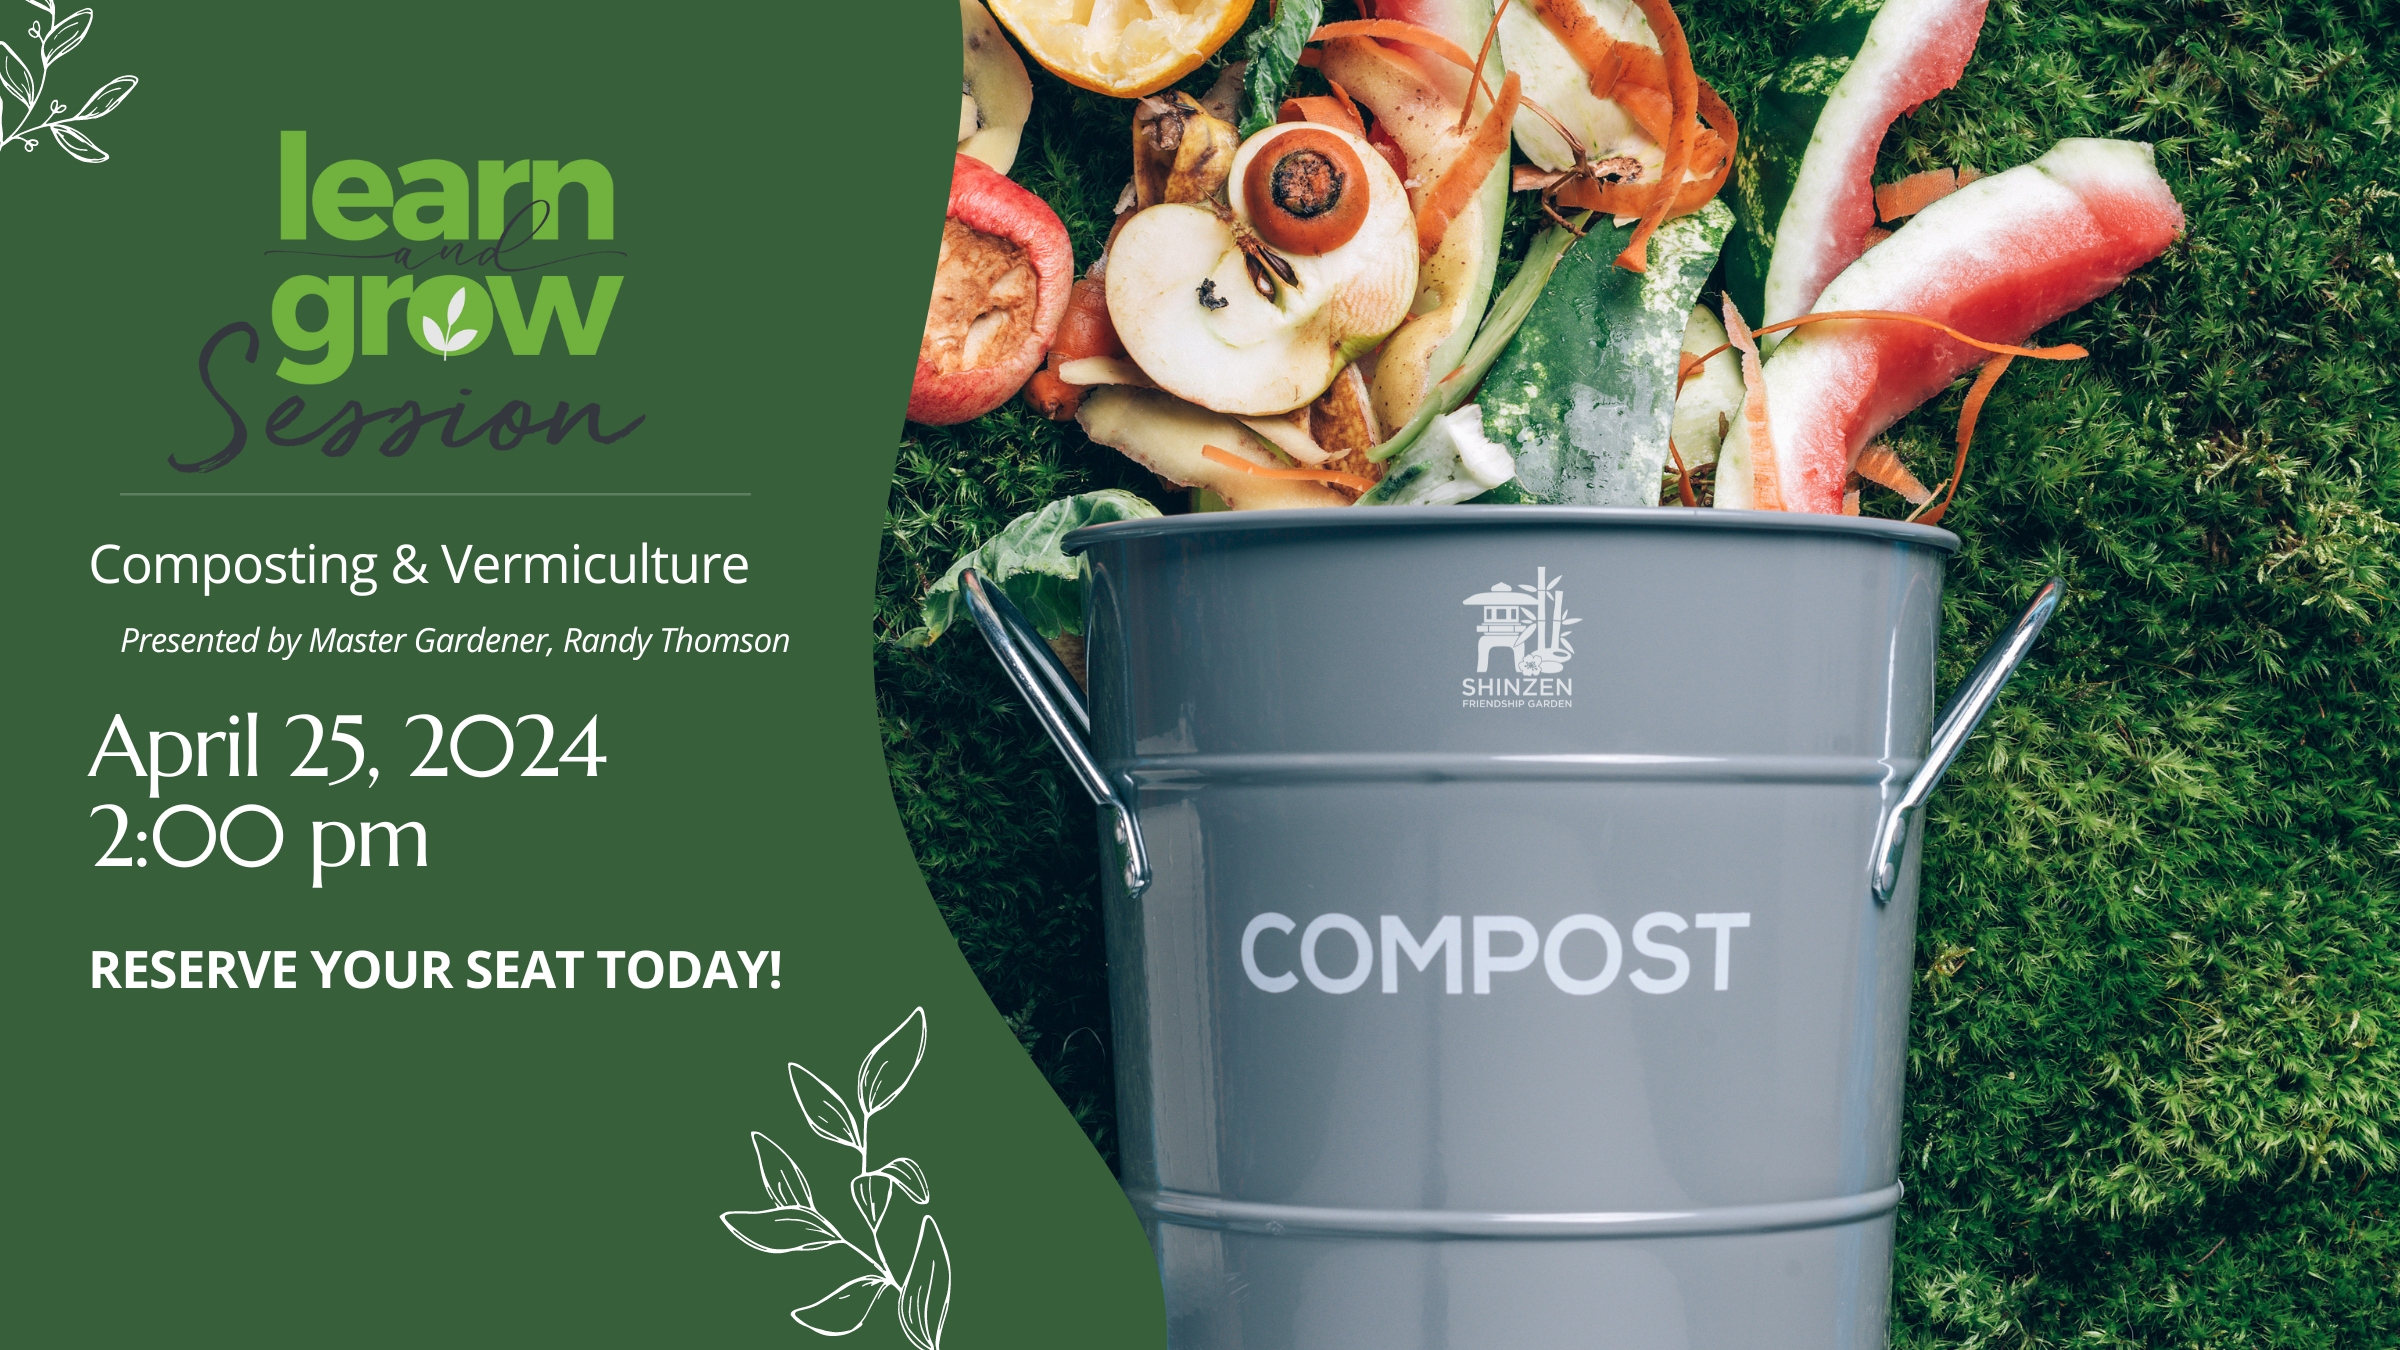 learn and grow session composting and vermiculture